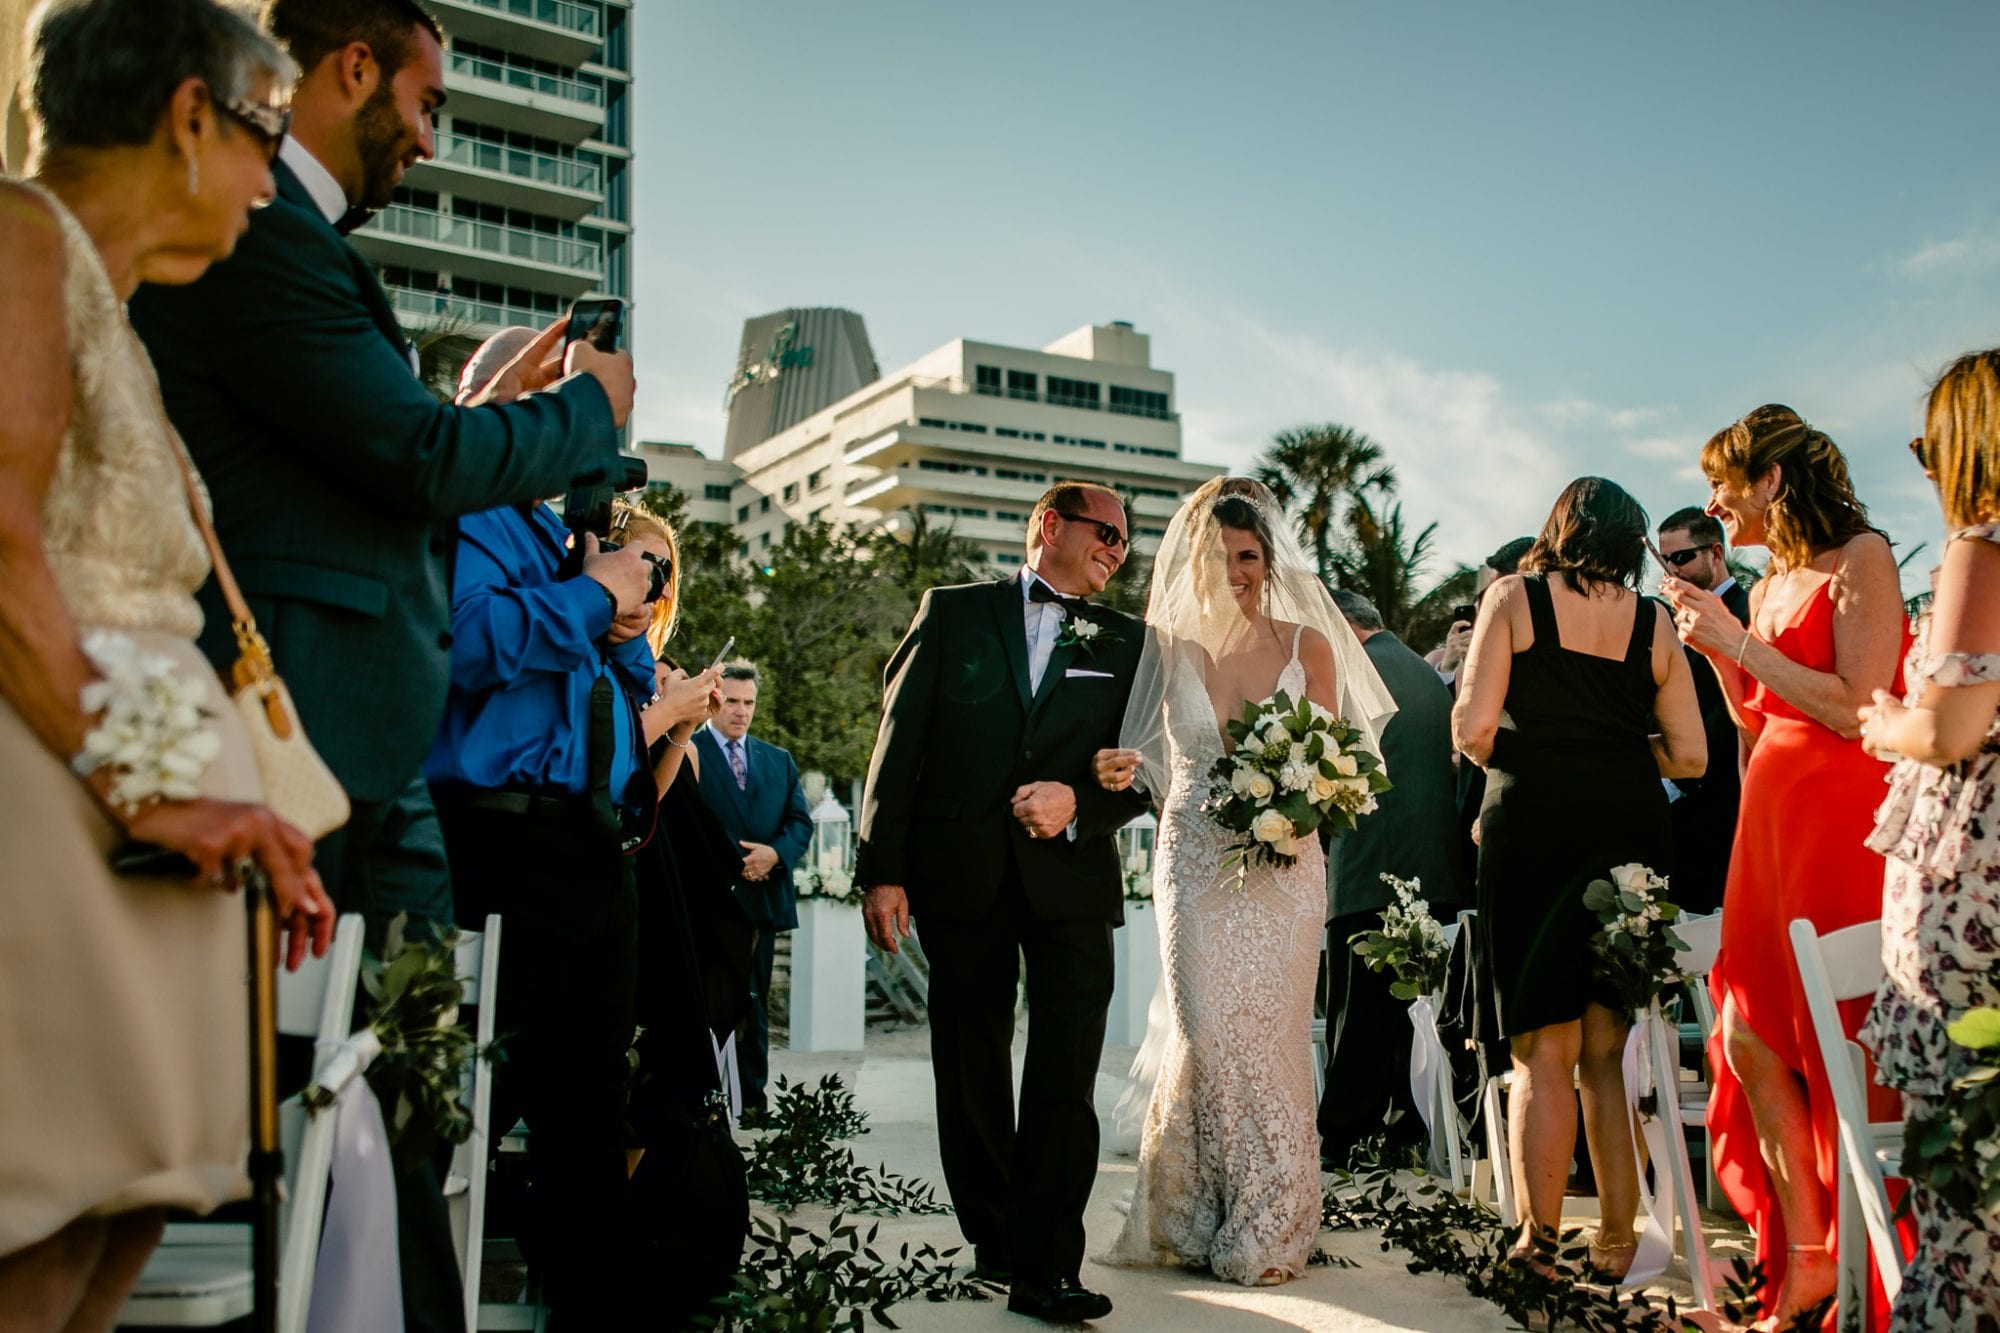 A bride and groom walking down the aisle at a wedding ceremony held at Eden Roc Resort in Miami.